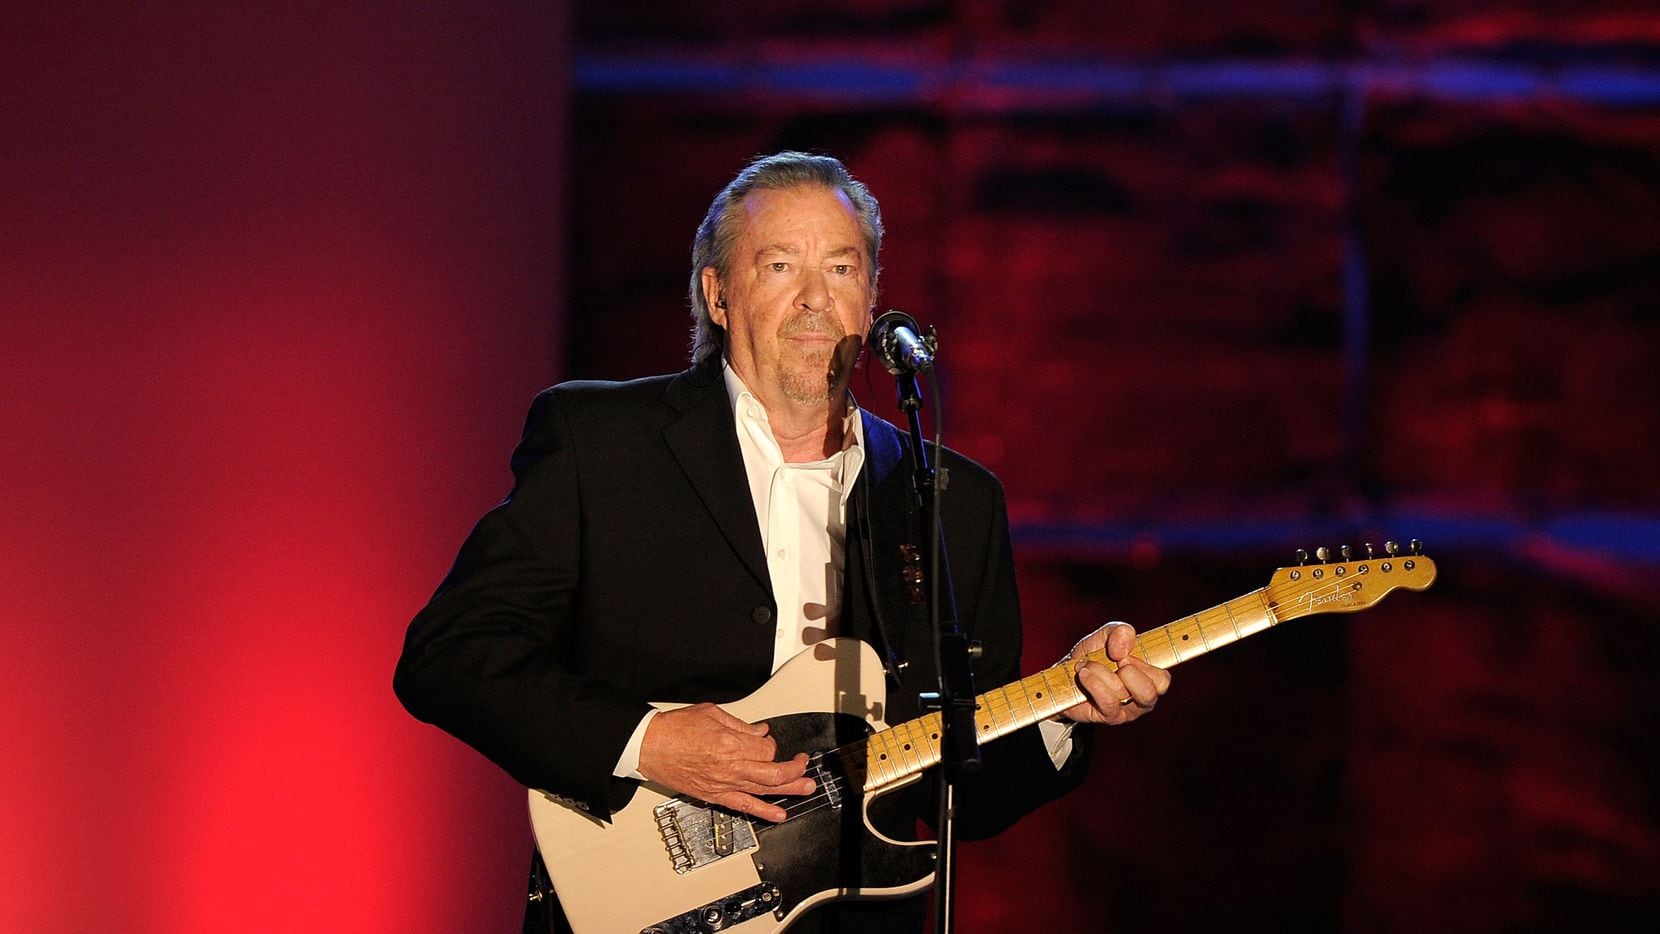 Boz Scaggs performs onstage at the Songwriters Hall of Fame 42nd Annual Induction and Awards...